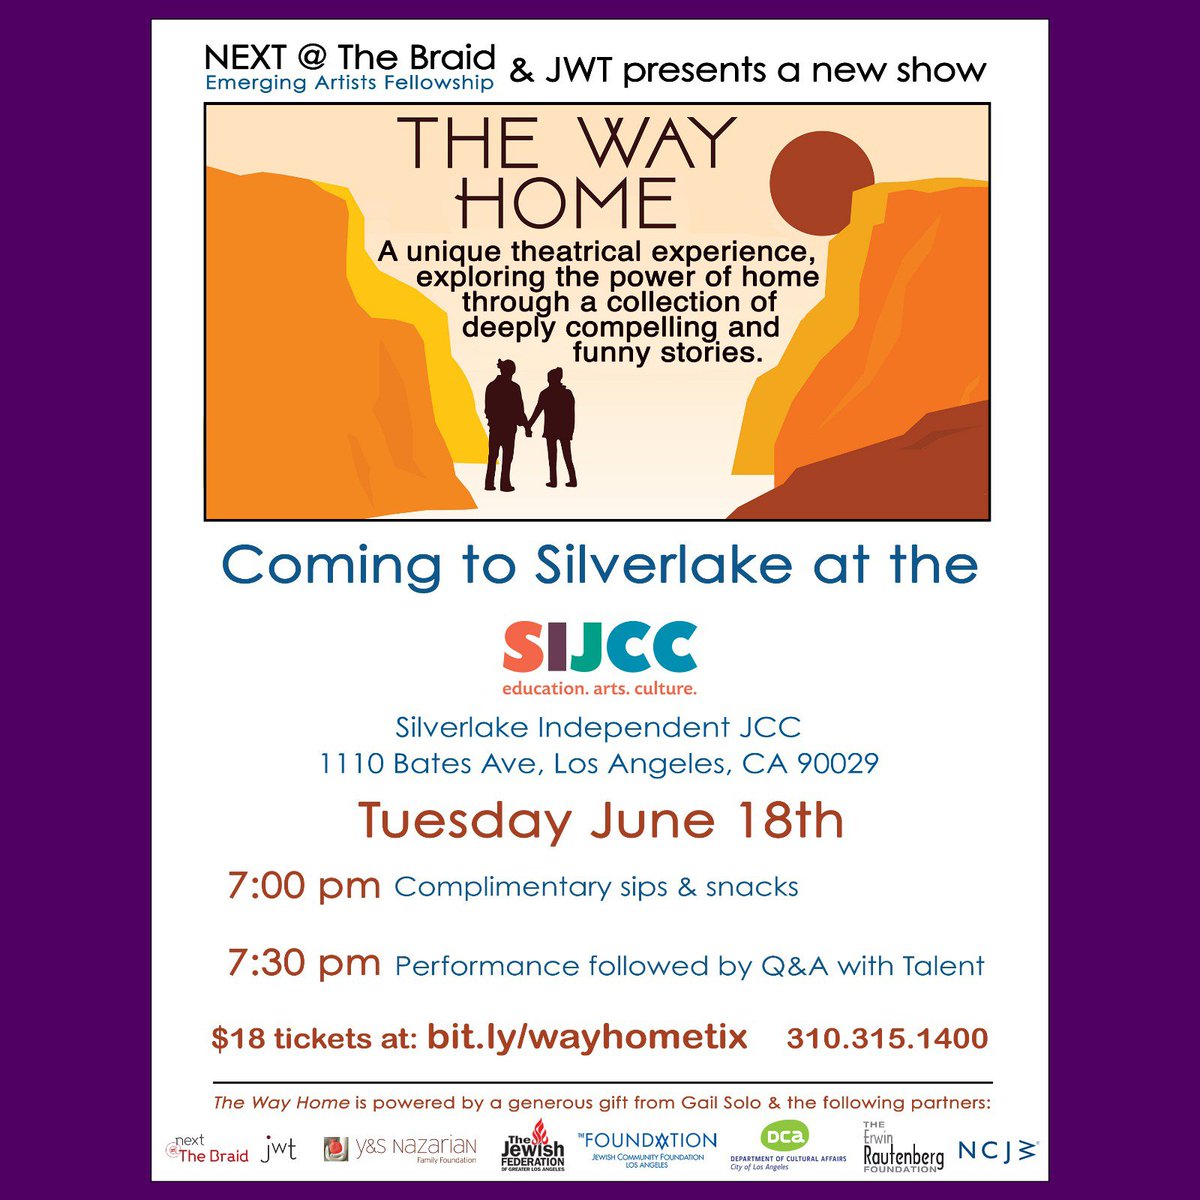 One last show 2 go! Come on out #Silverlake for closing night of #TheWayHome tomorrow night - a beautiful outdoor performance at the #SIJCC awaits you!! TICKETS at bit.ly/wayhometix
- @eastsidejews
#lathtr #eastla #storytelling #closingnight #twothumbsup #latheater #onstage